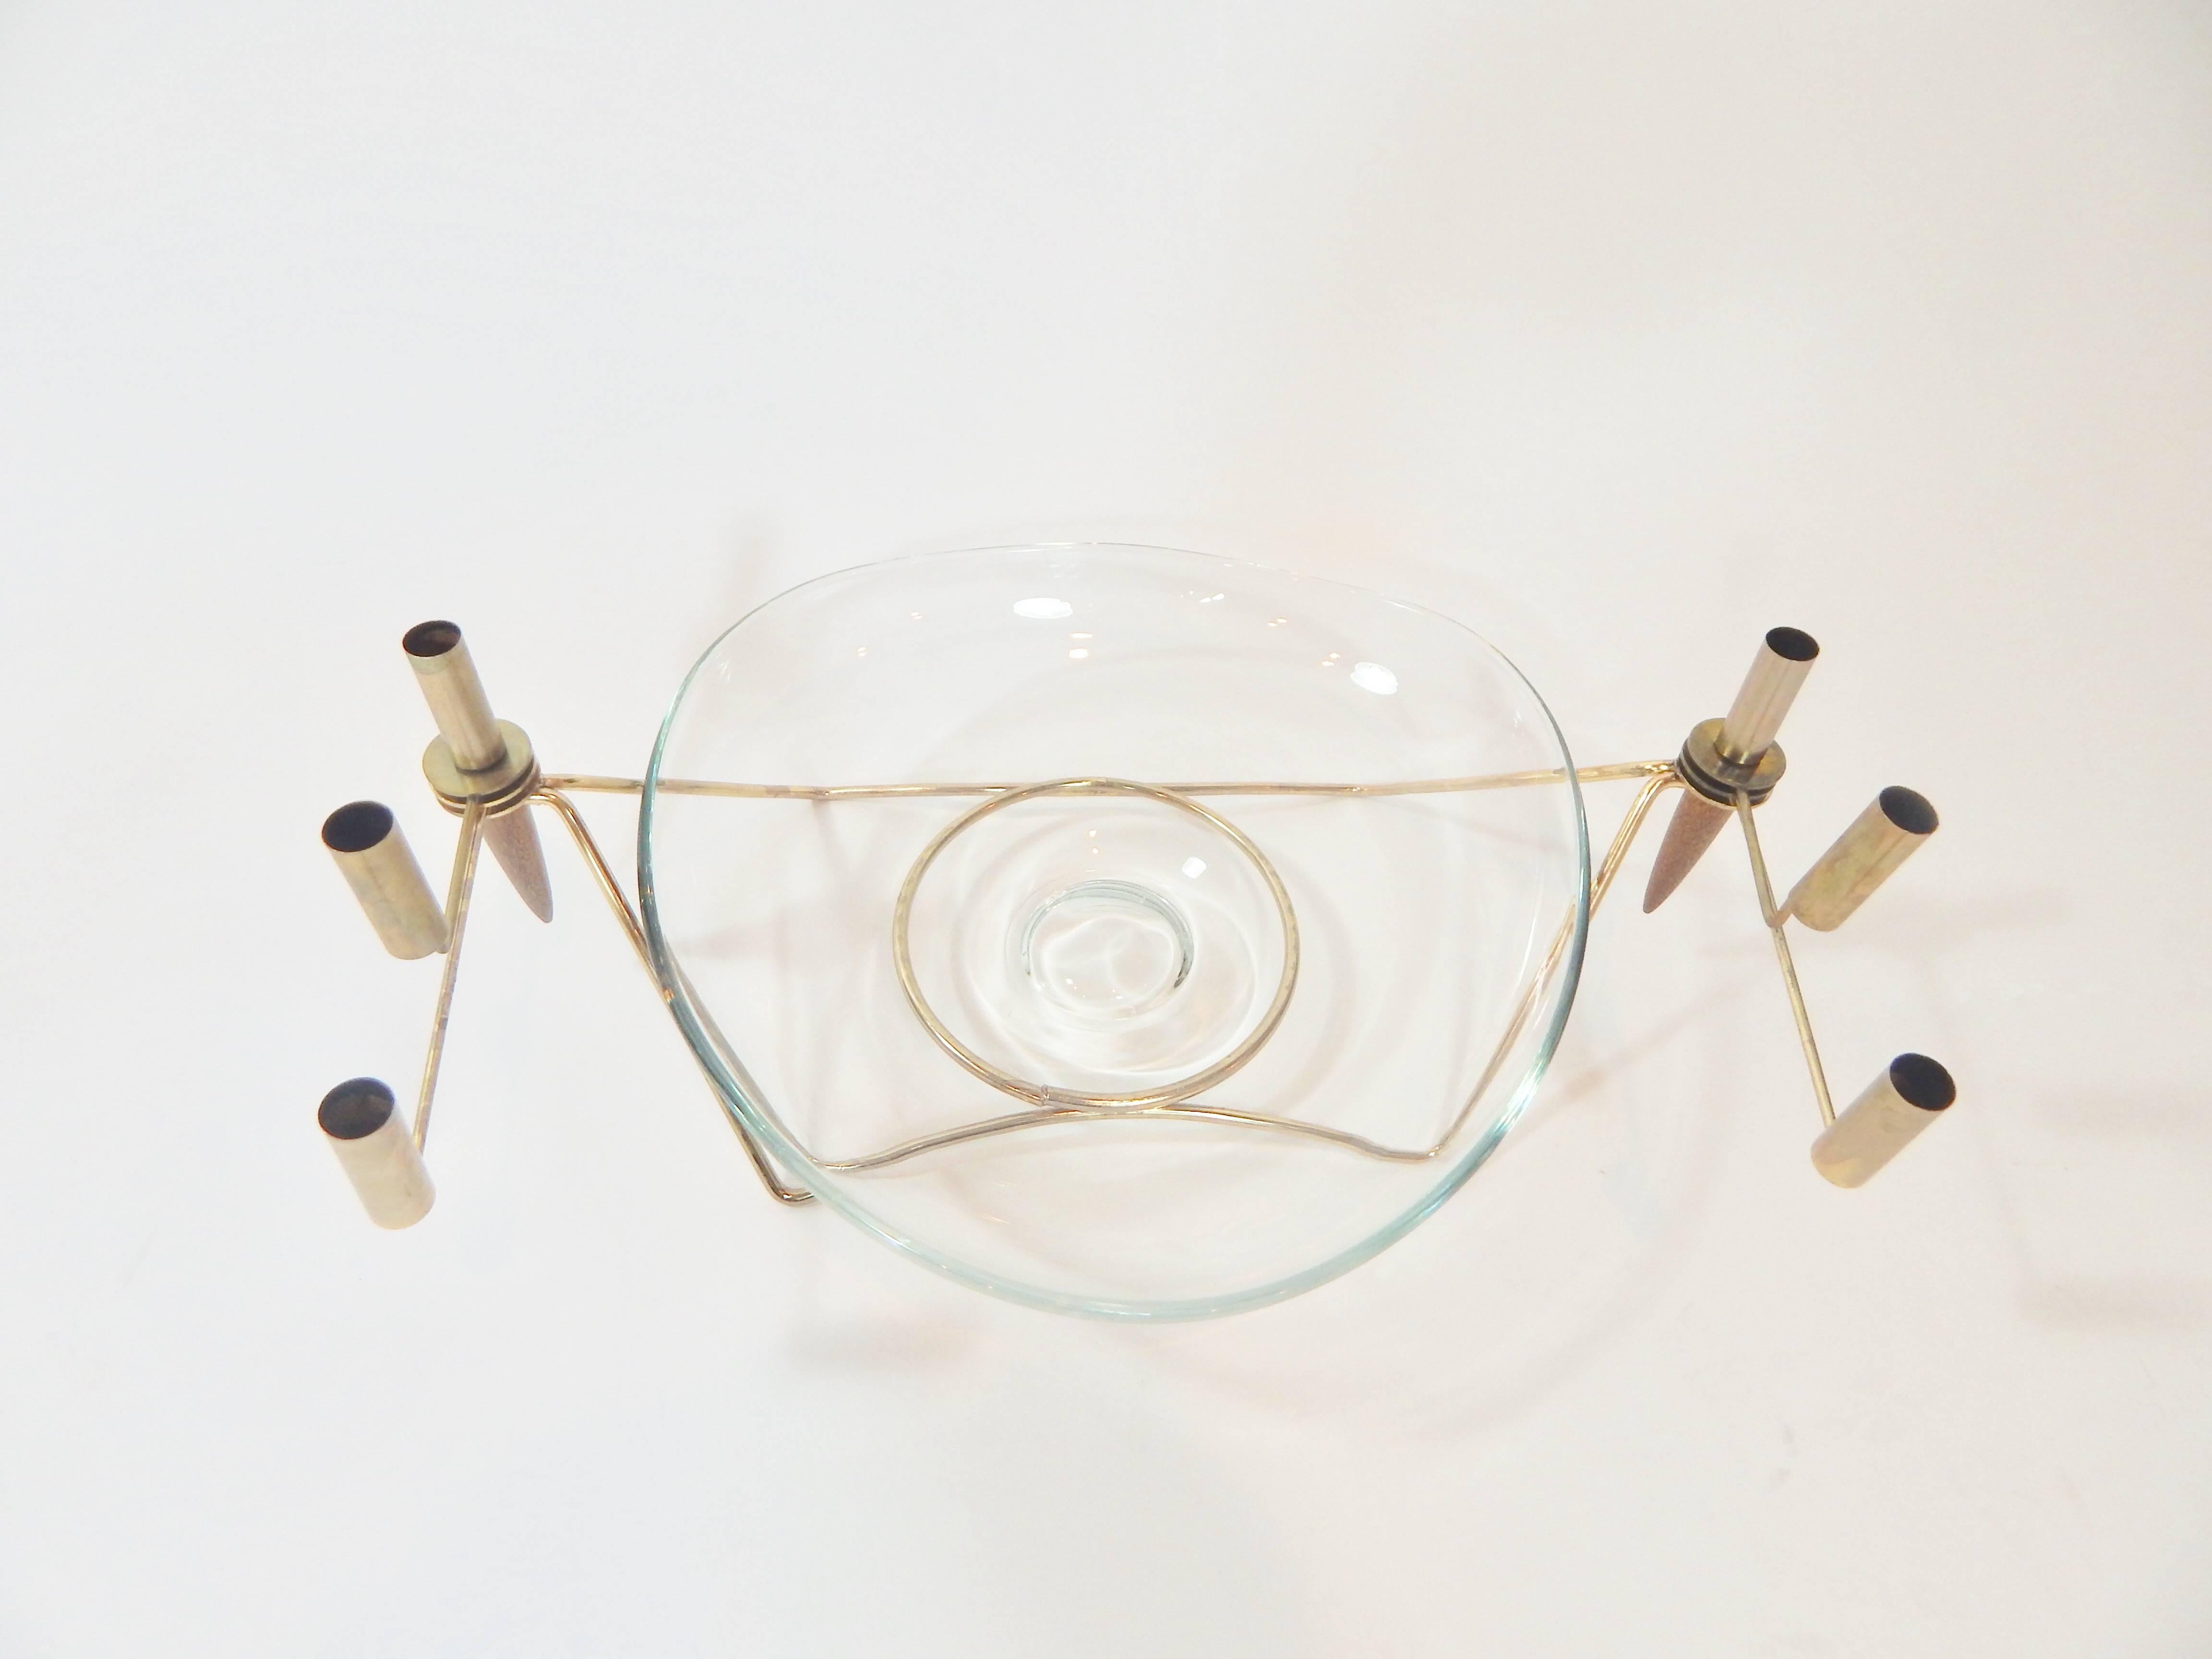 Unique midcentury glass serving bowl or centerpiece. Glass bowl and adjustable gold / brass and walnut candelabra holder. Six candle arms can extend and be adjusted to multiple positions. Glass bowl is removable. 
Measurements: 
Gold holder width 25